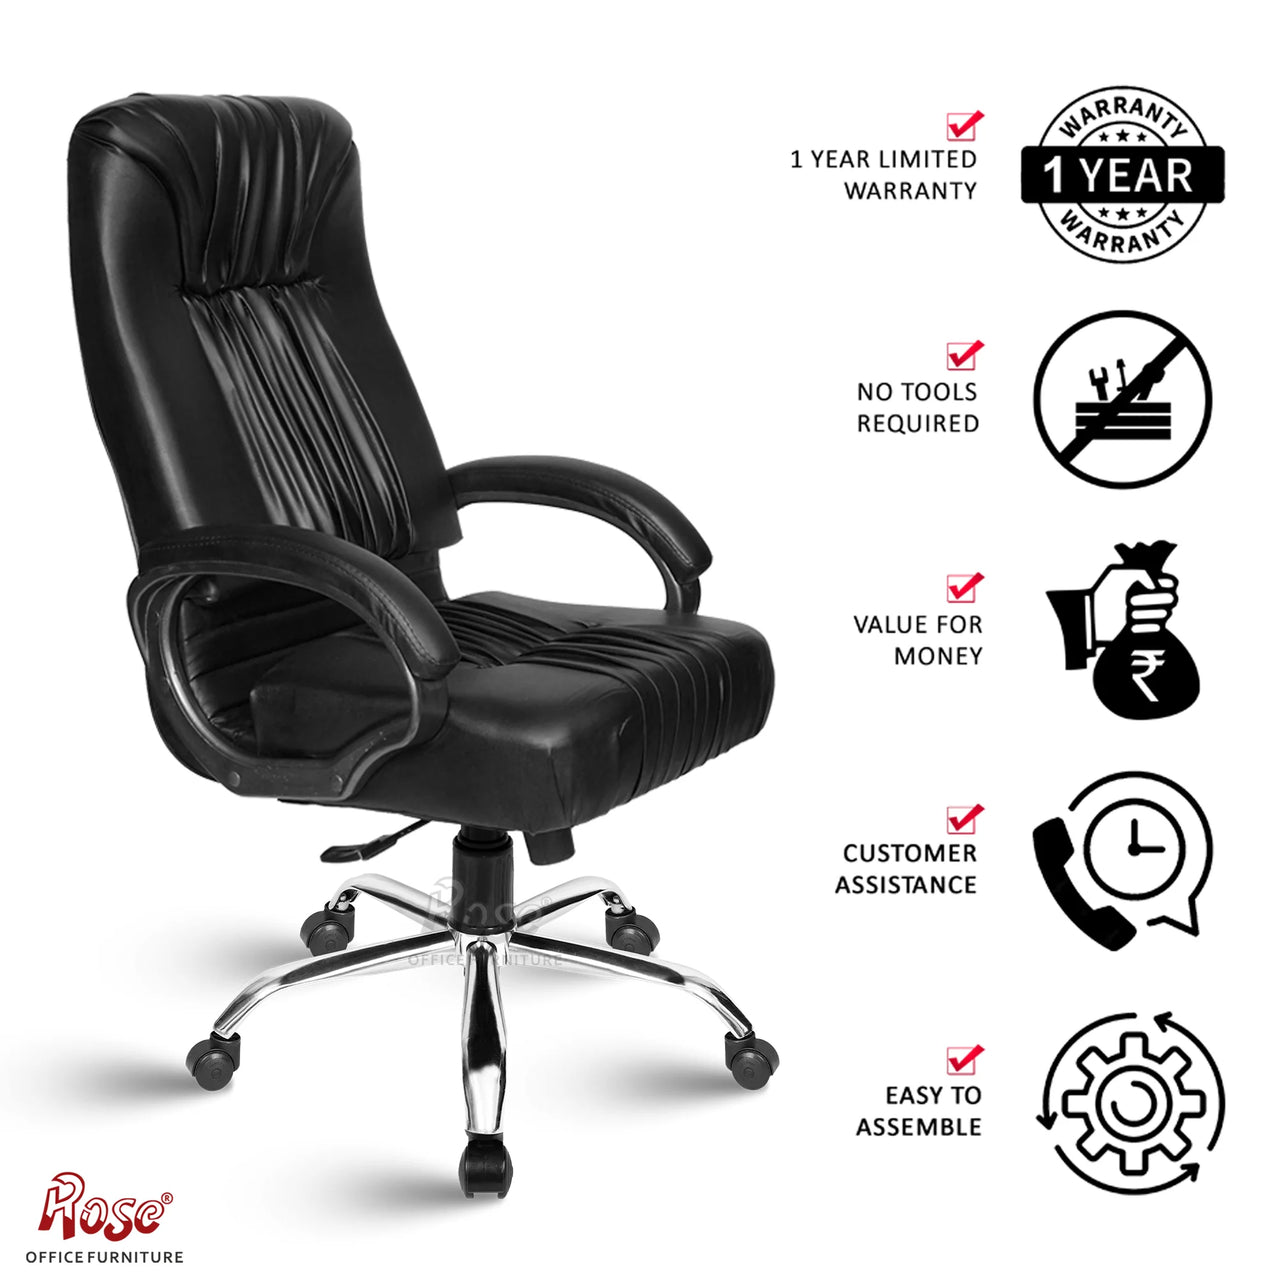 Black Beauty Leatherette Executive High Back Revolving Office Chair (Black)